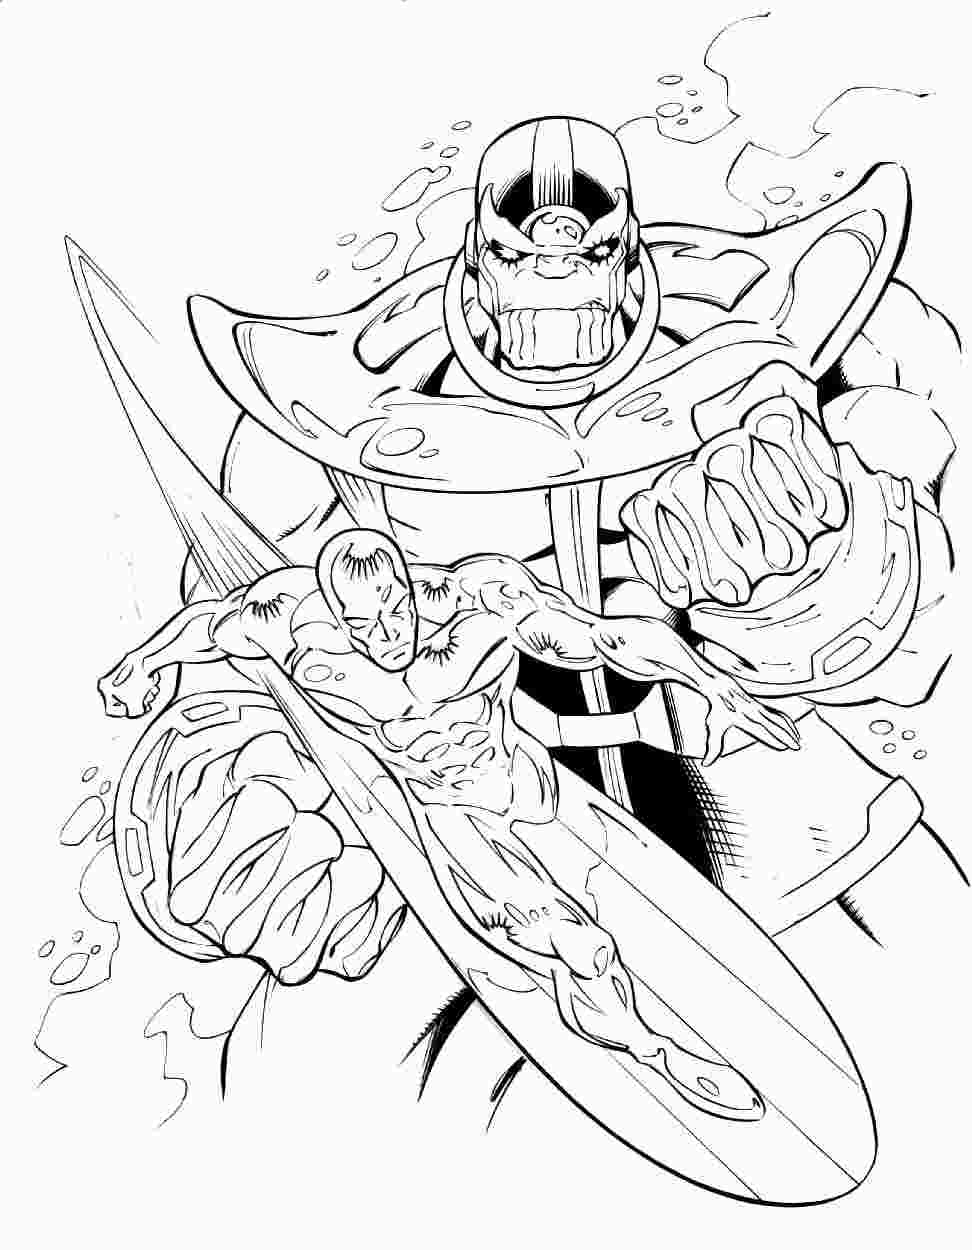 Thanos uses his full power in the Avengers Coloring Page